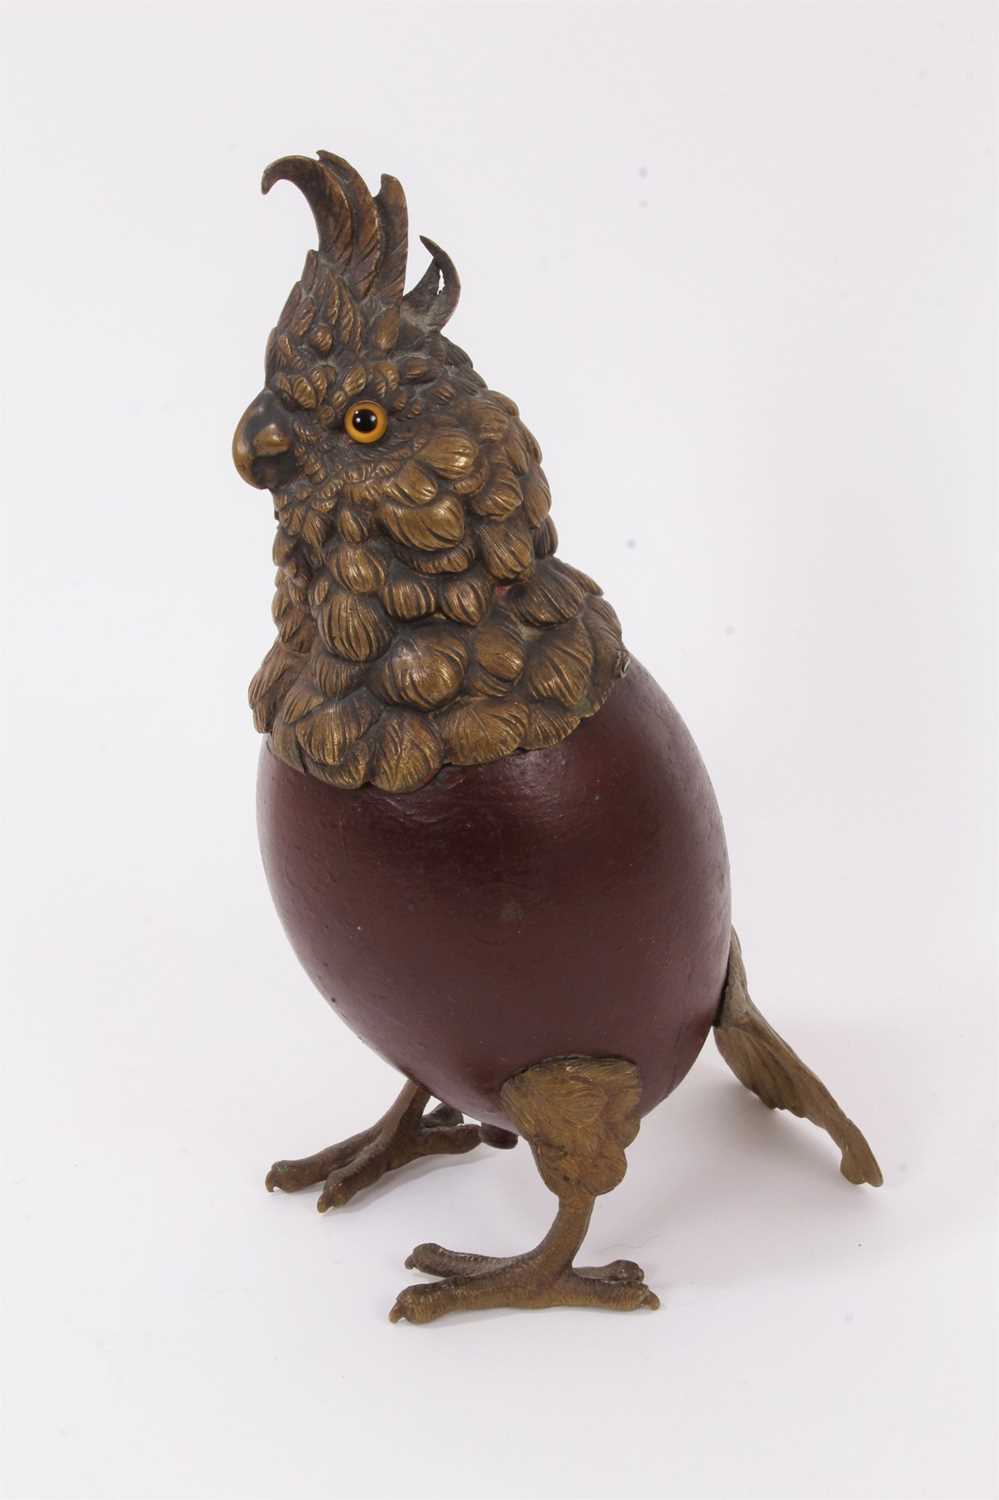 Lot 1043 - 19th century Continental novelty inkwell in the form of a cockatoo